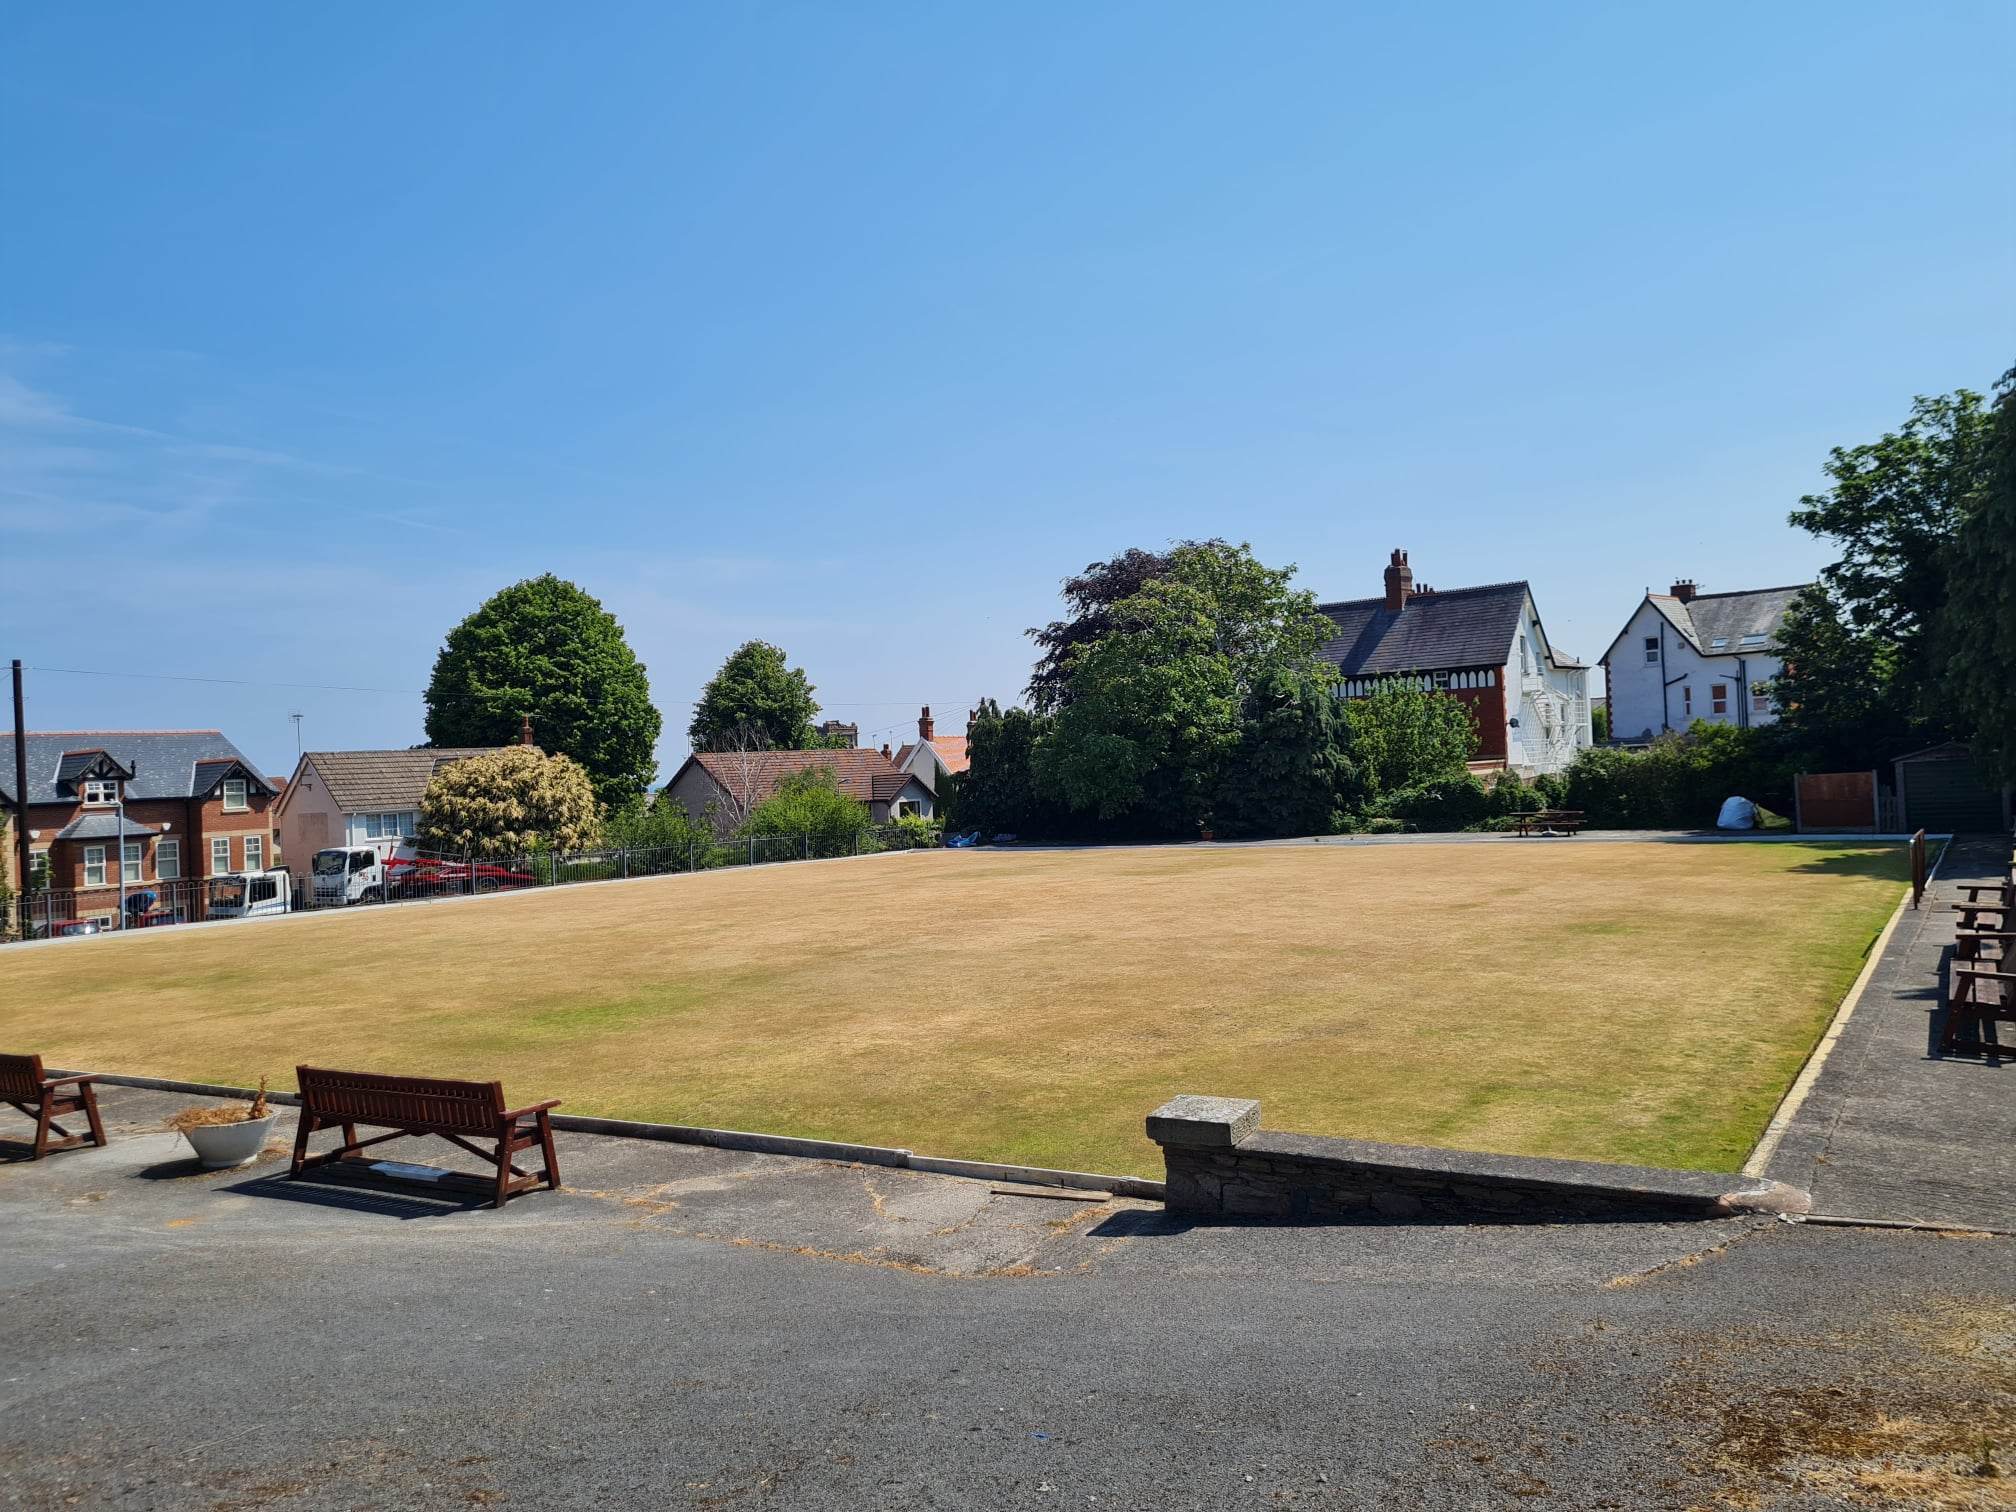 Bowling green. Residents say the loss of a bowling green and relocation of an allotment to make way for new homes will cause traffic congestion, parking problems, and impact on vulnerable people.